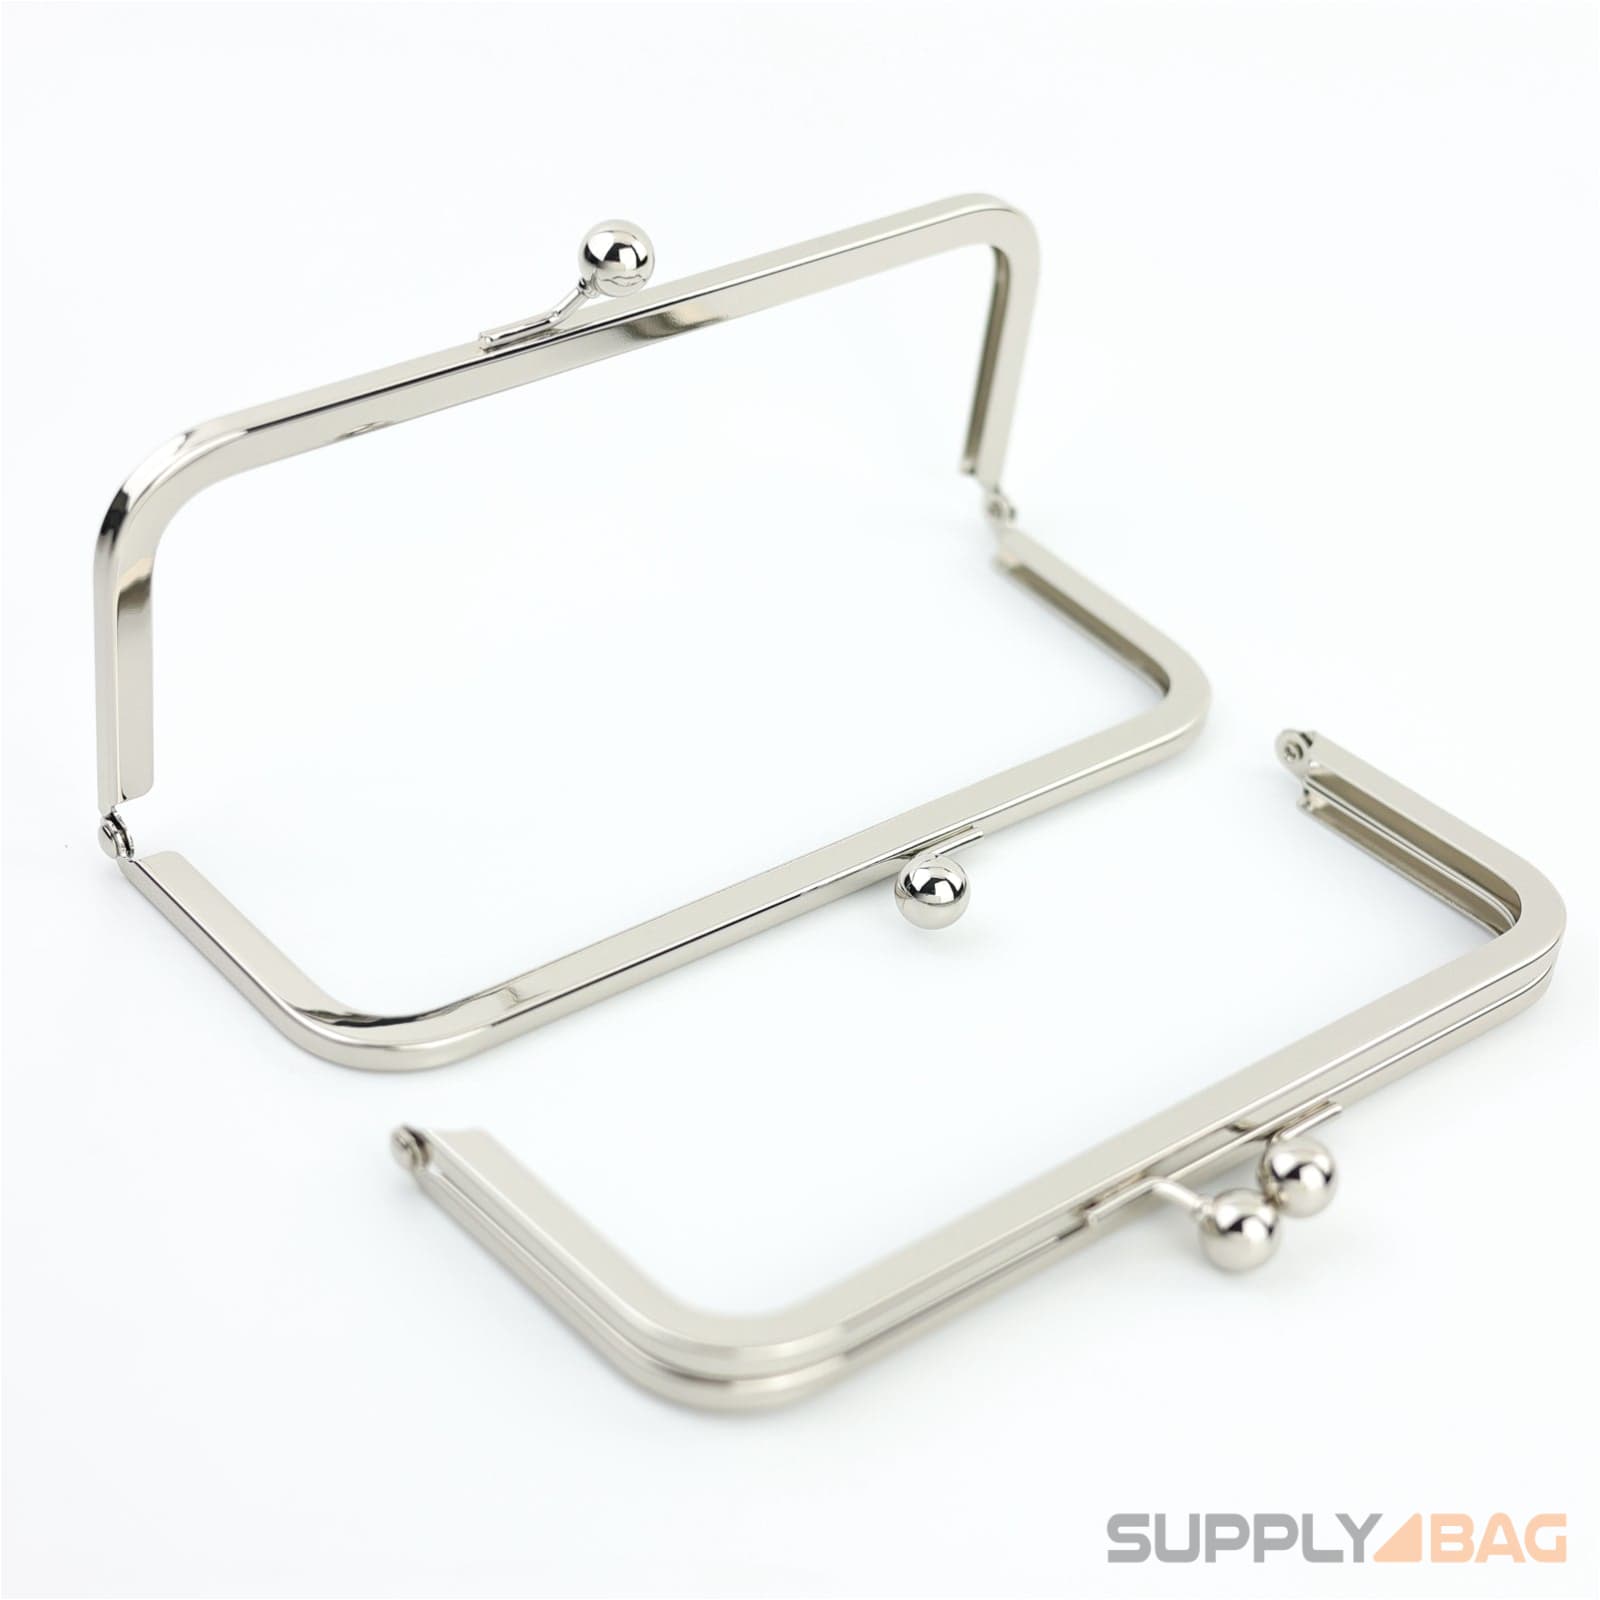 Buy 4 Inch X 2 Inch 10.5cm Rectangle Coin Bag Purse Pouch Frame Glue in  Hardware Supply Anti Bronze Nickel Online in India - Etsy